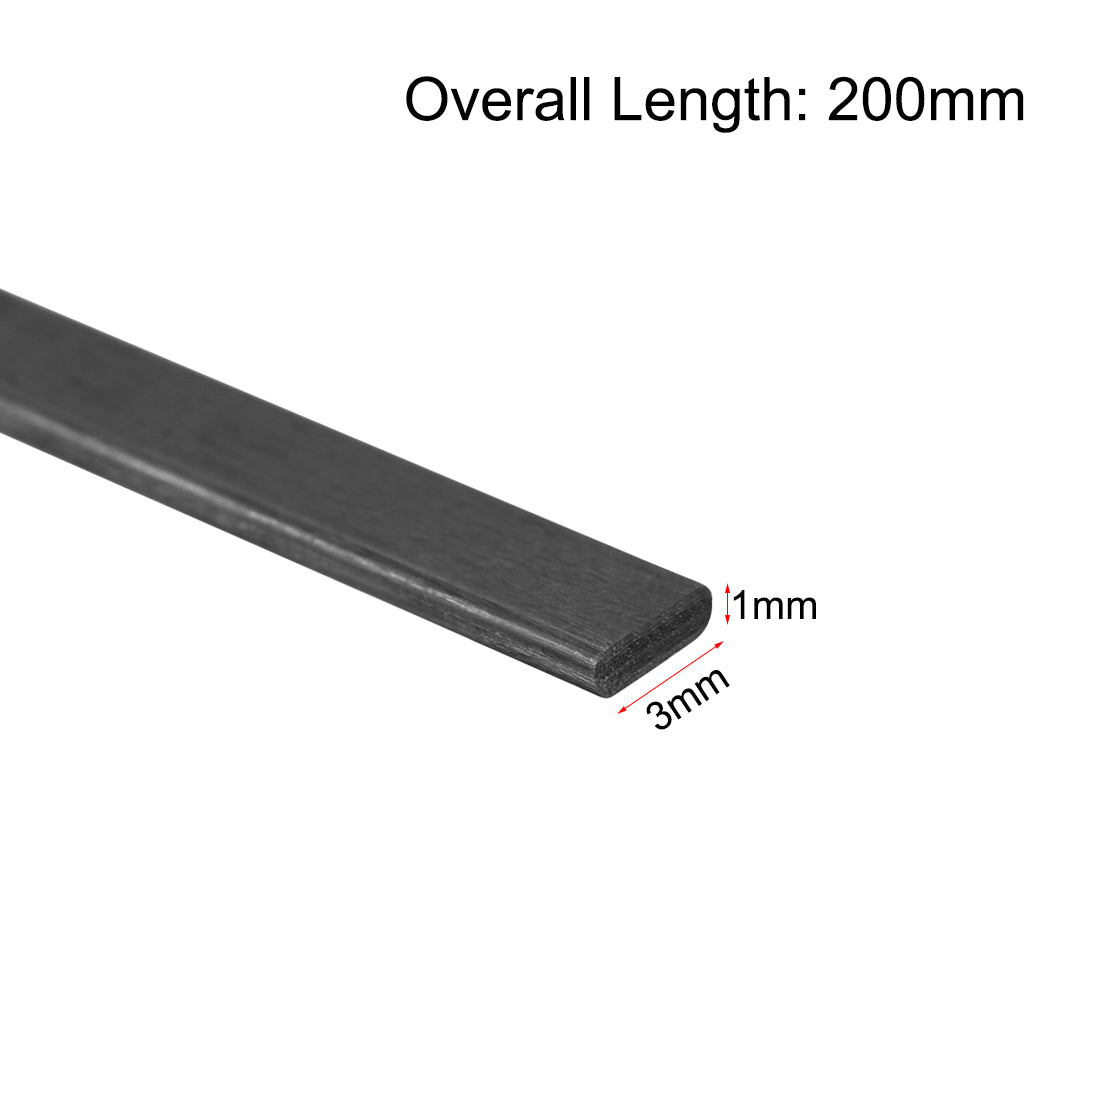 uxcell Uxcell Carbon Fiber Strip Bars 1x3mm 200mm Length Pultruded Carbon Fiber Strips for Kites, RC Airplane 5 Pcs